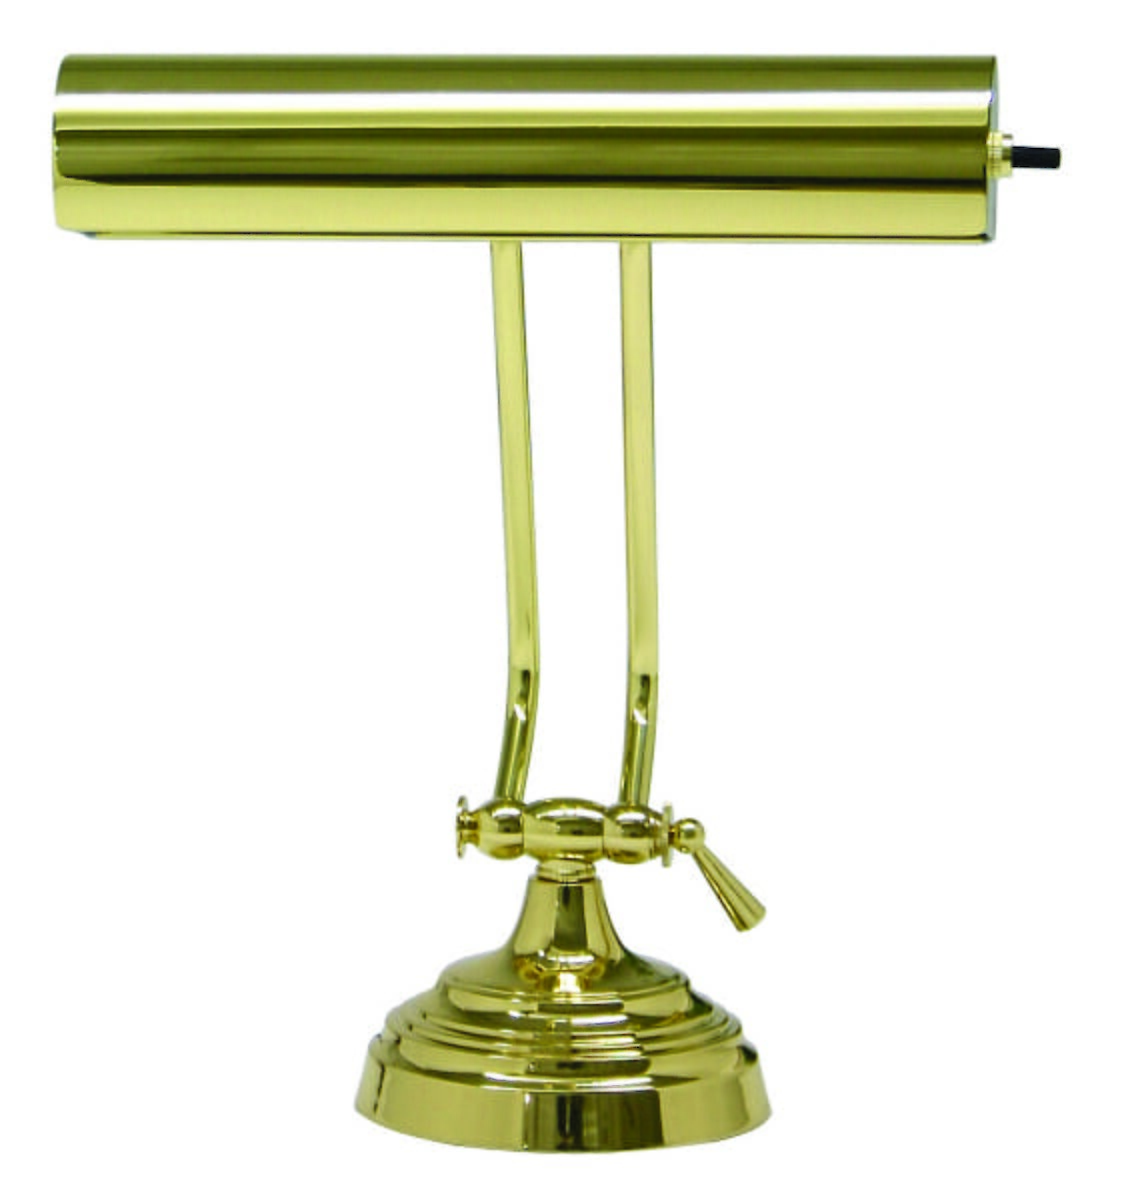 House of Troy 10"" Piano Desk Lamp in Polished Brass Finish -  P10-131-61